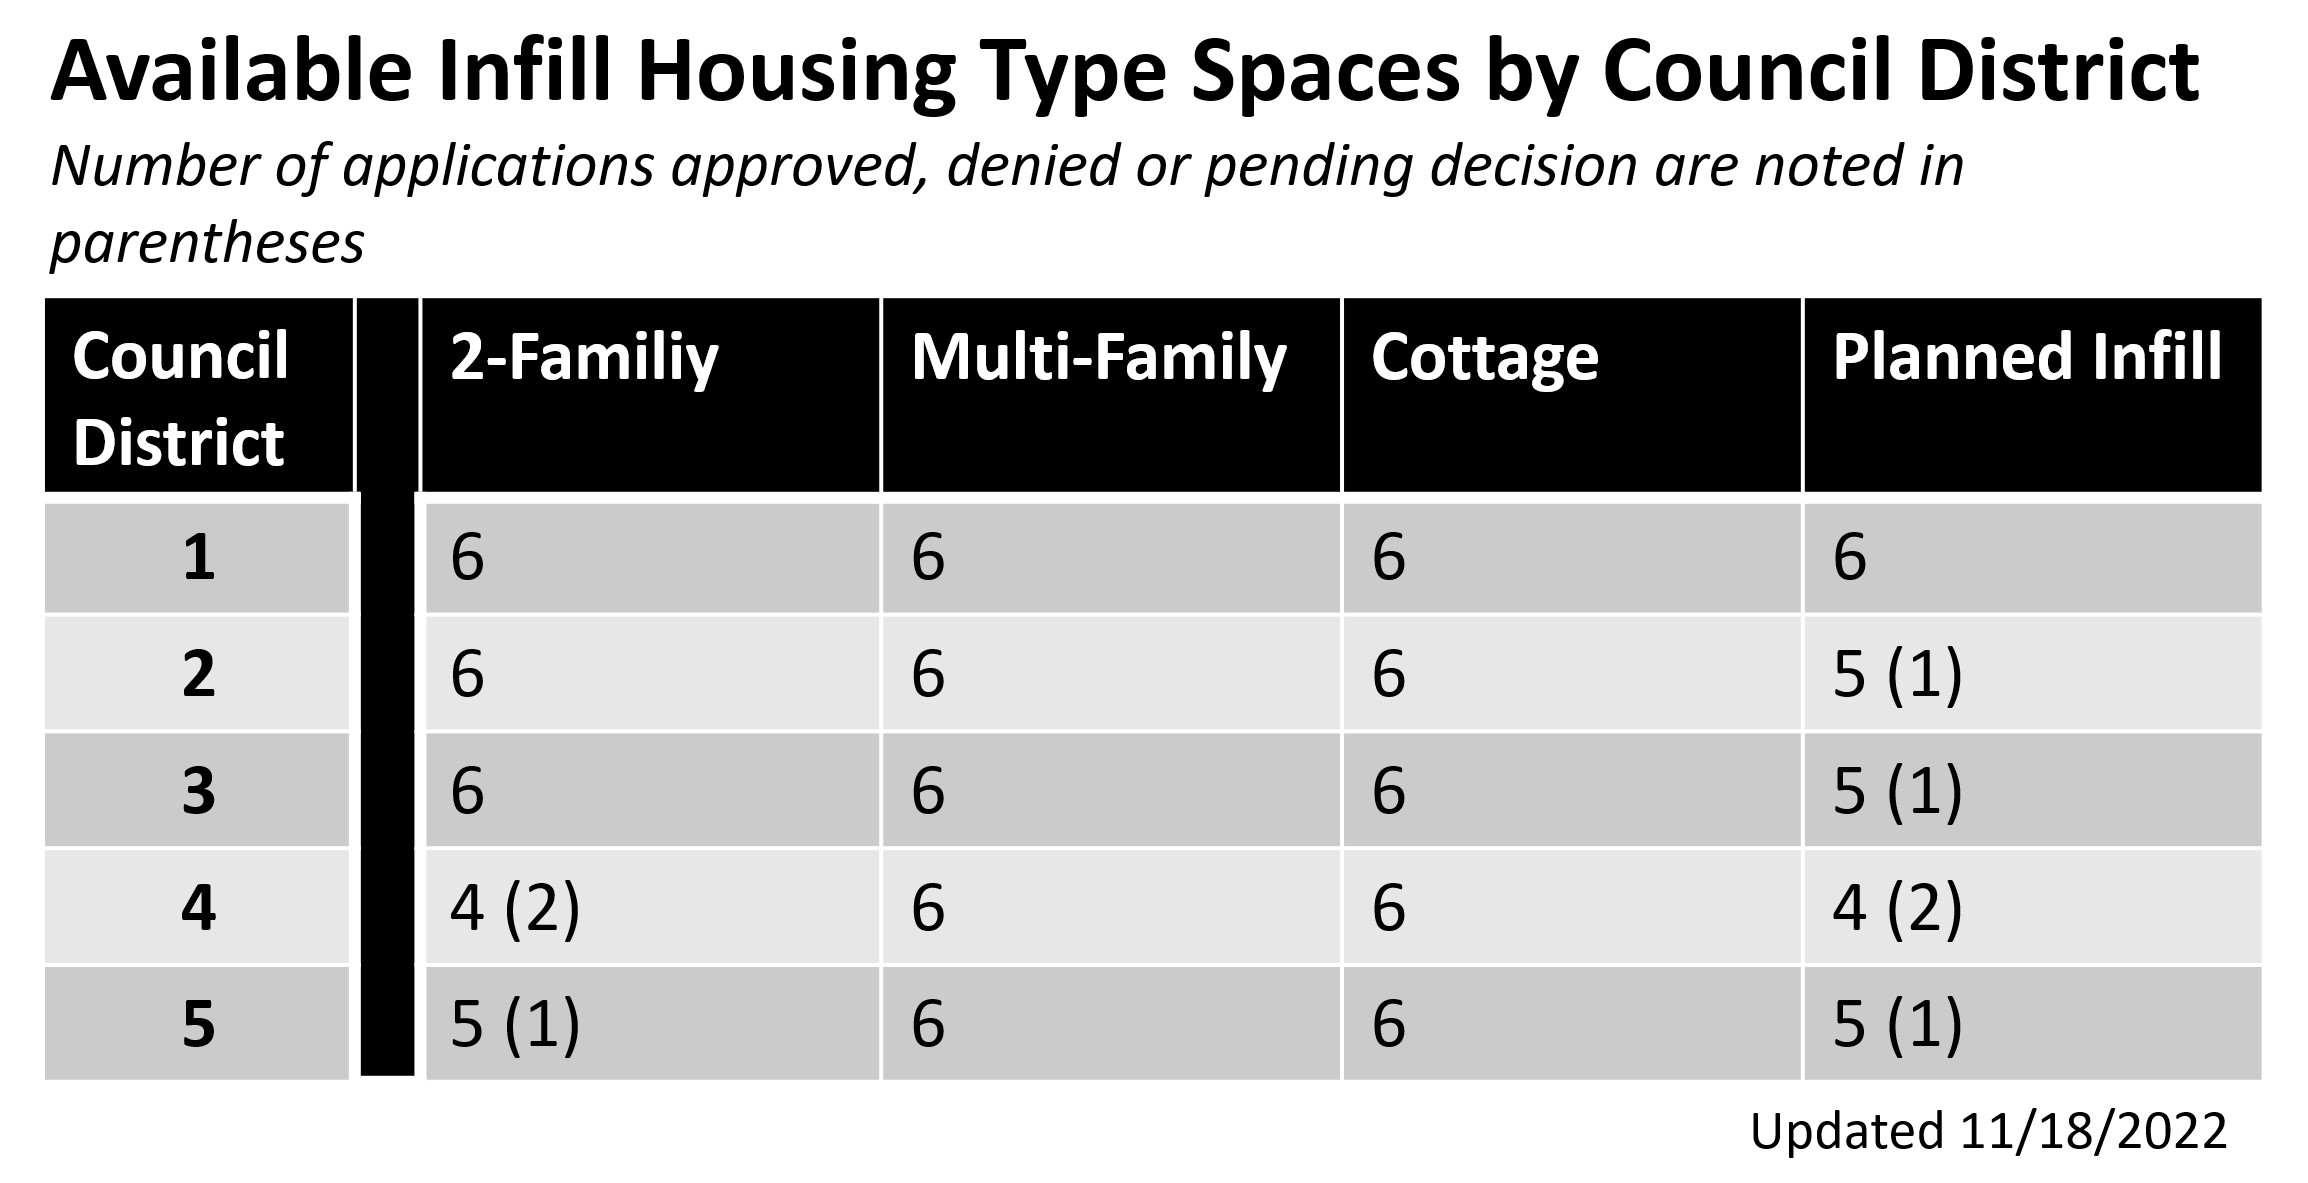 Available Infill Housing Spaces by Council District